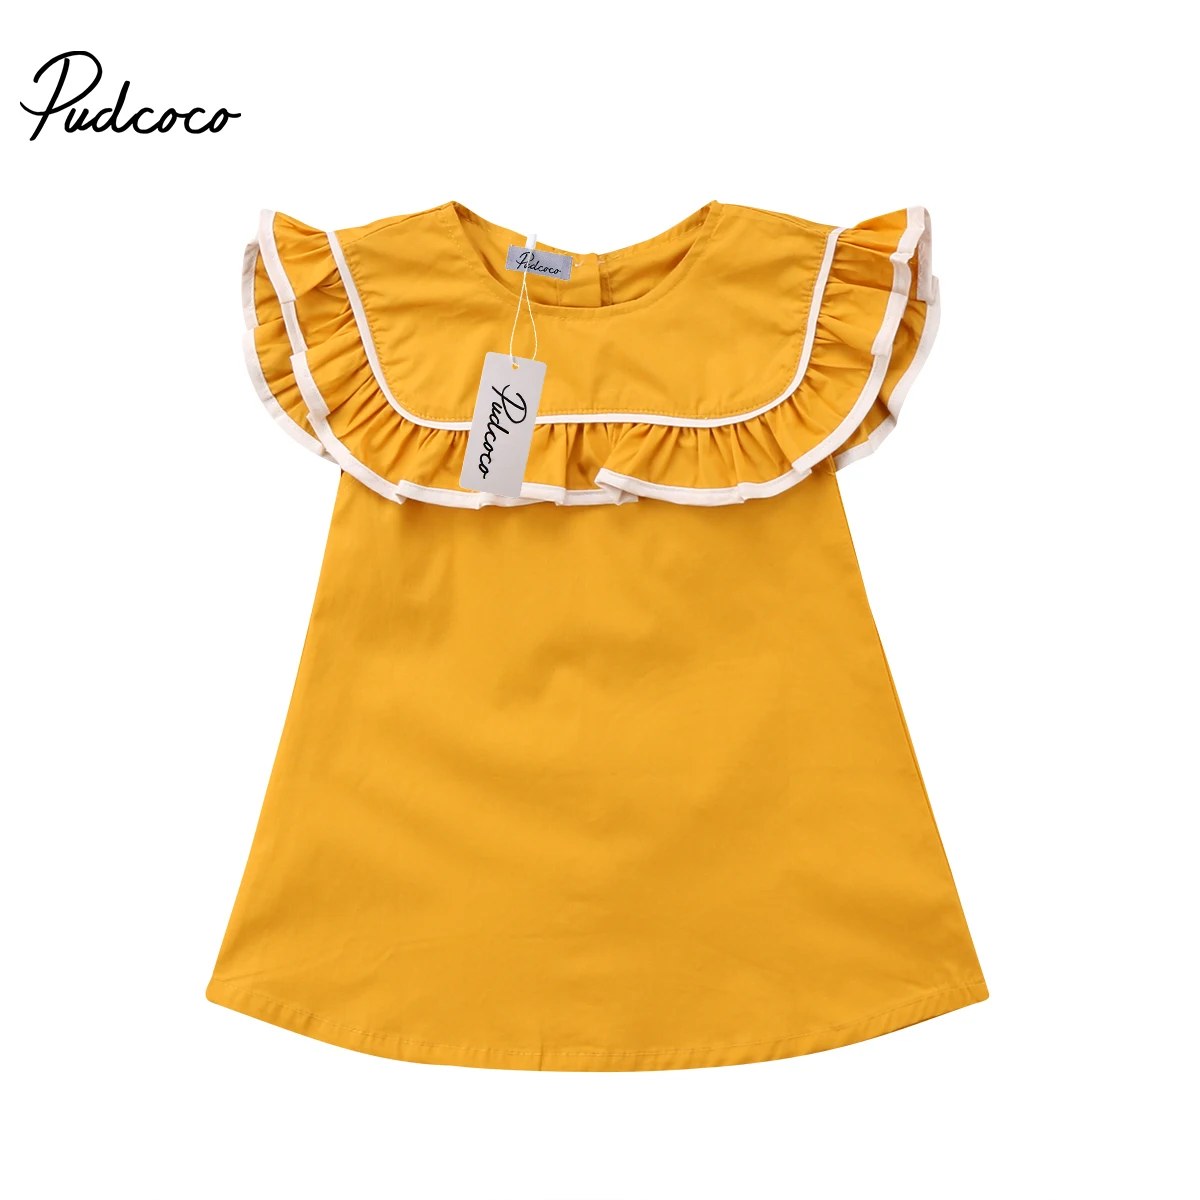 

2018 Brand New Toddler Infant Child Kids Baby Girl Dress Summer Sleeveless Party Princess Ruffled Sundress Solid Clothes 1-6T